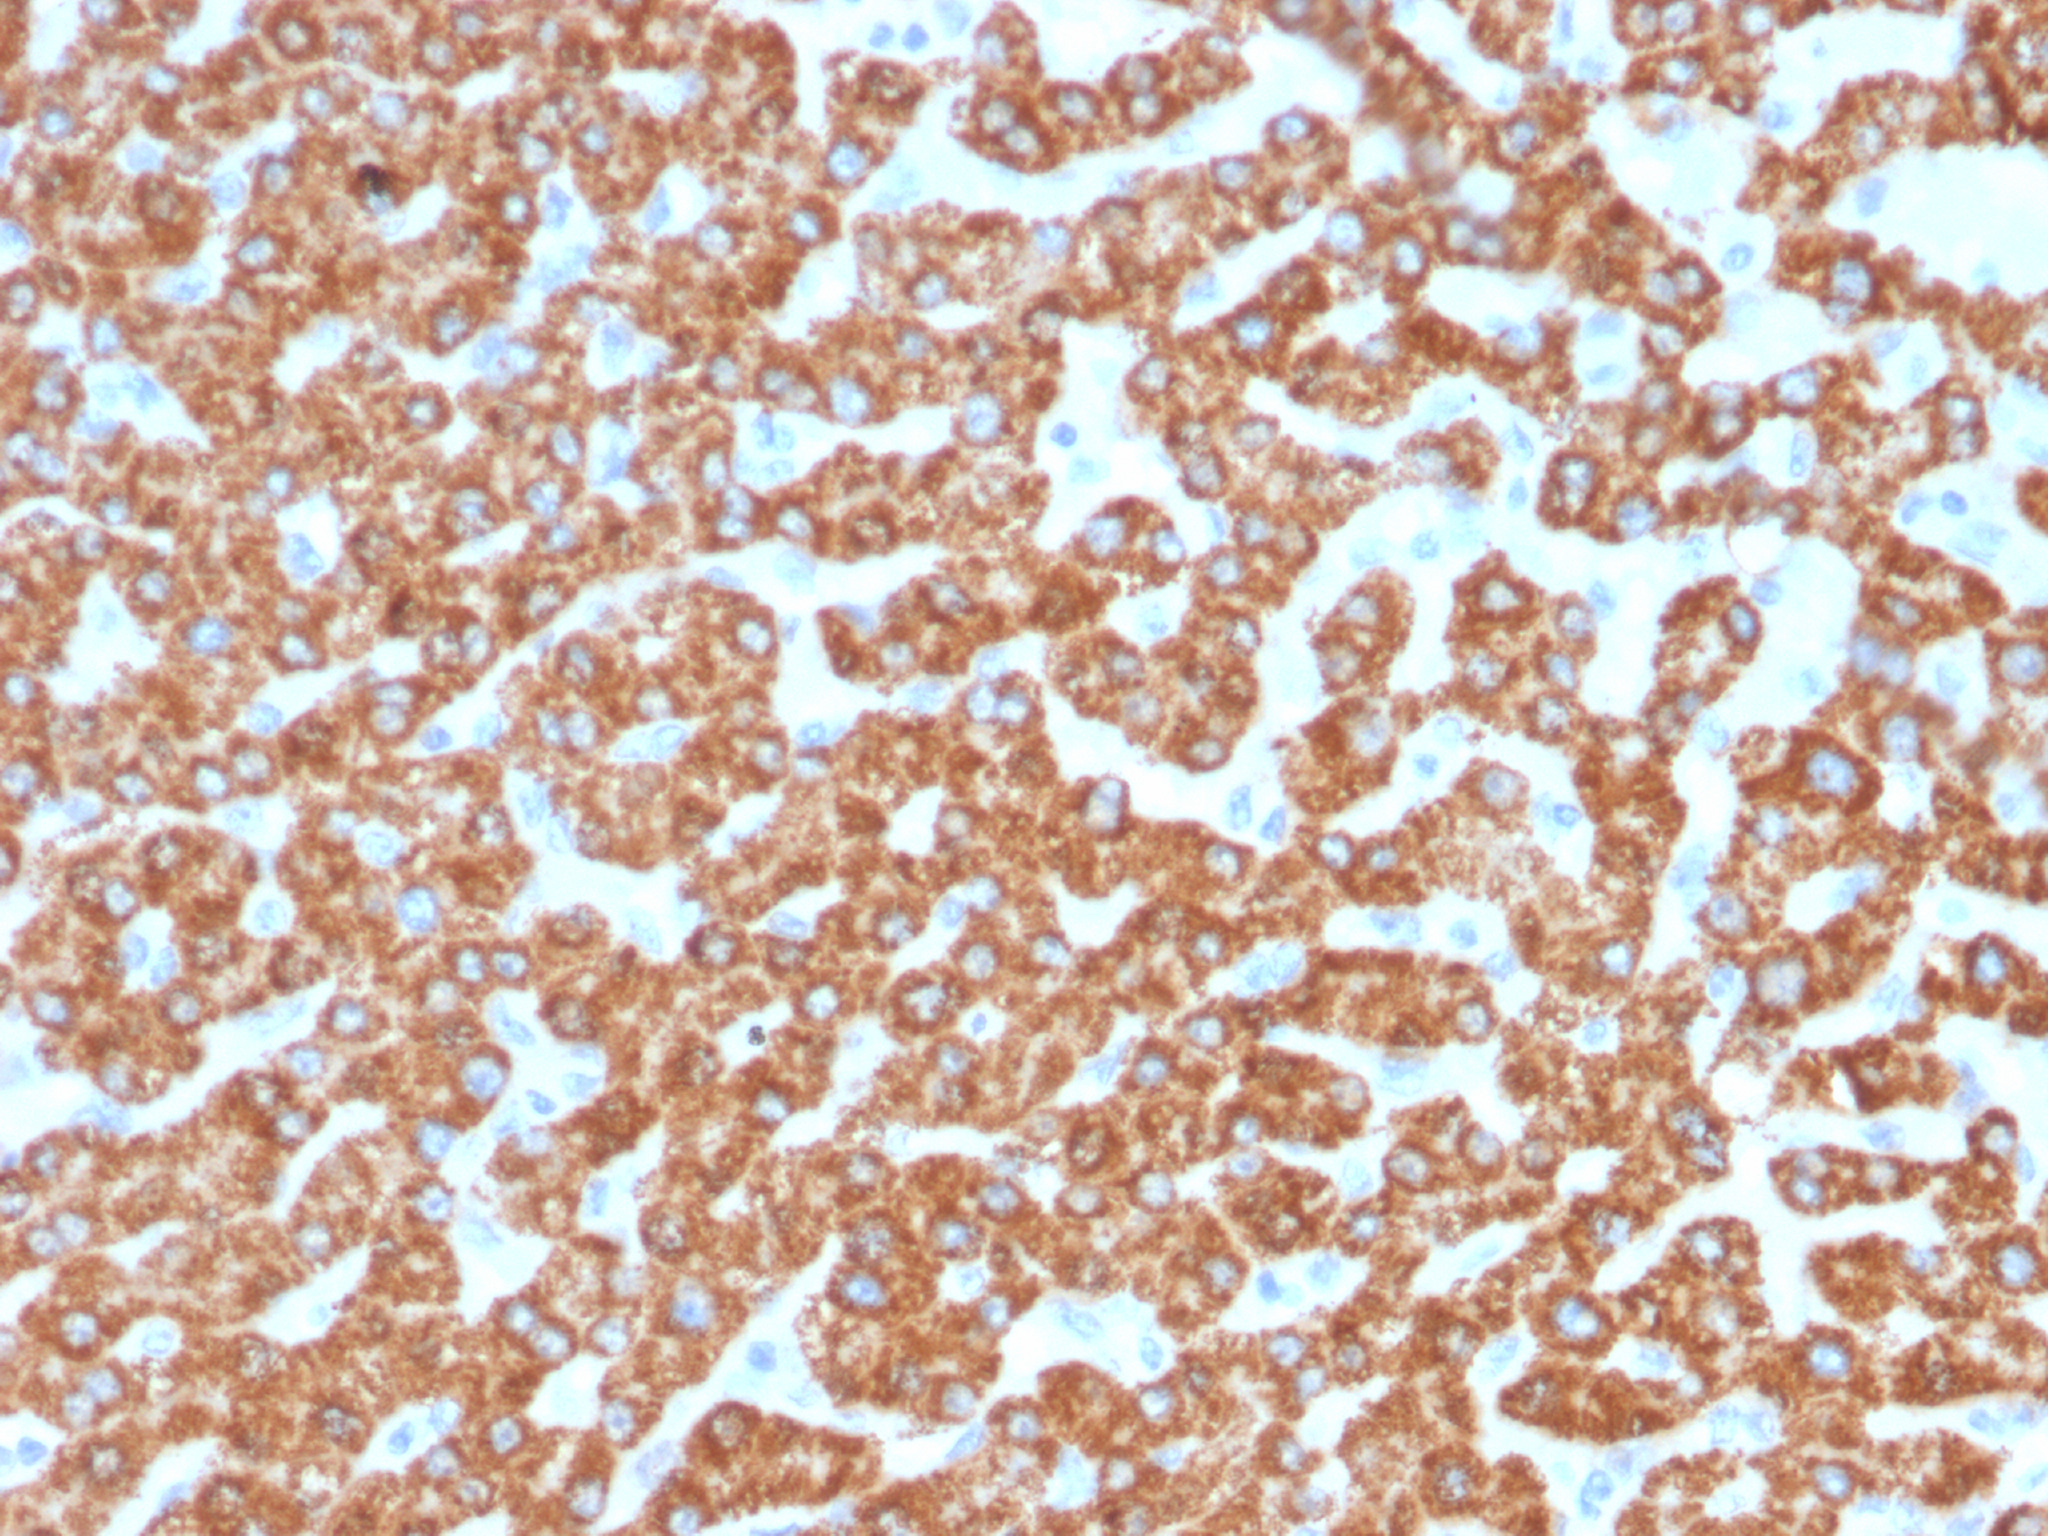 200 ul of predilute SingleStep™ Poly-HRP conjugated goat anti-mouse secondary antibody was incubated 30 minutes following staining of human liver samples with a hepatocyte specific mitochondrial marker (antibody catalog number msm4-966)  Excellent signal intensity is observed in the absence of any additional amplification step.